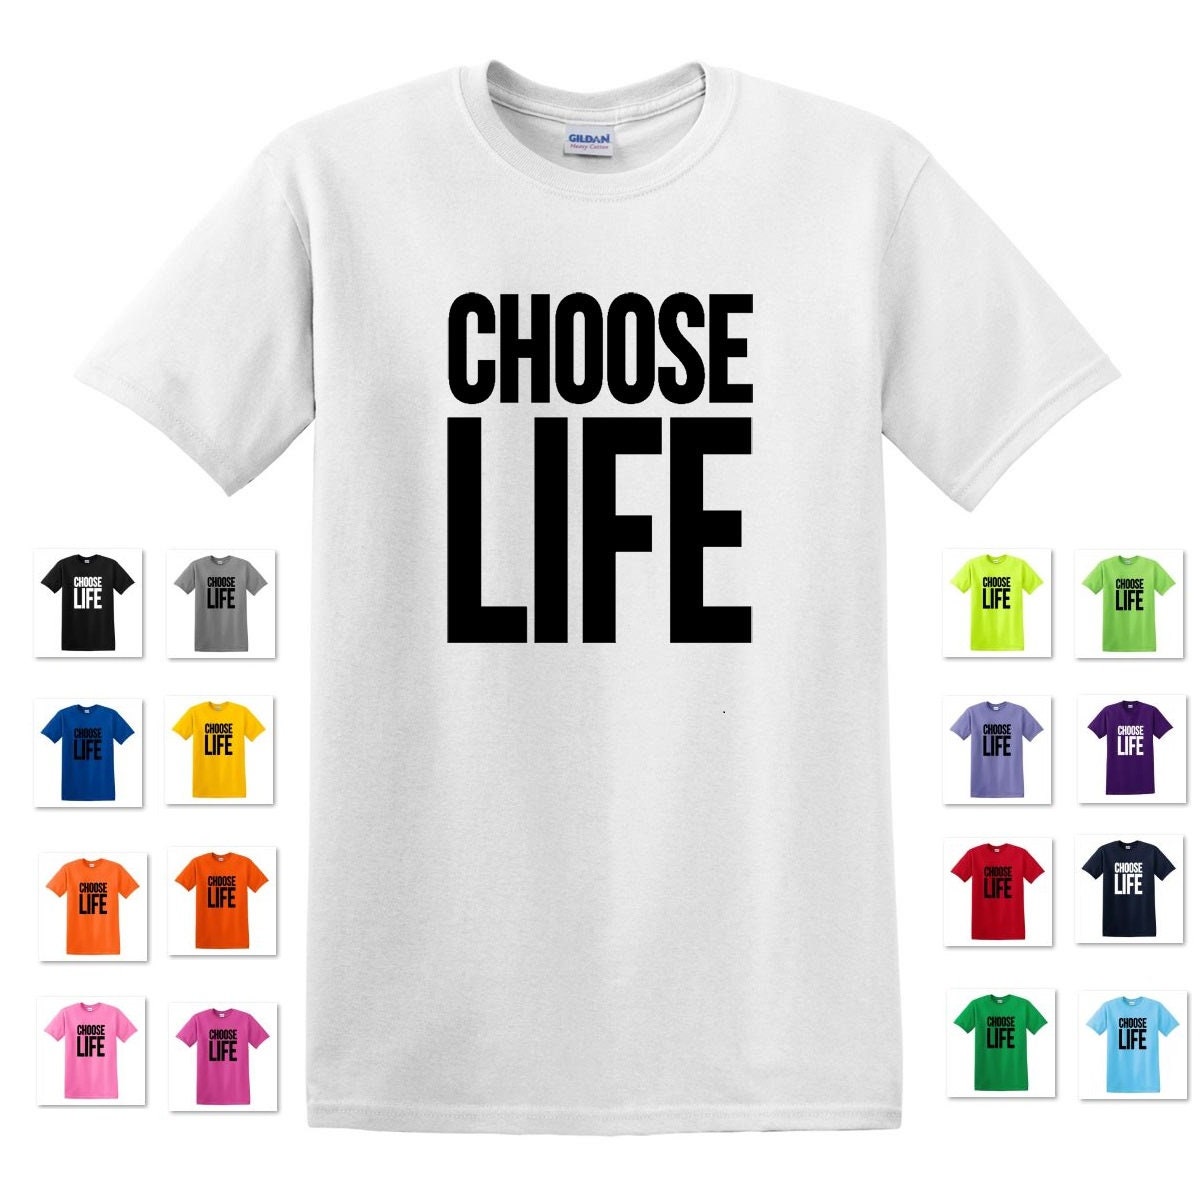 CHOOSE LIFE Wham Wake Me up Before You Go-go Music Video - Etsy